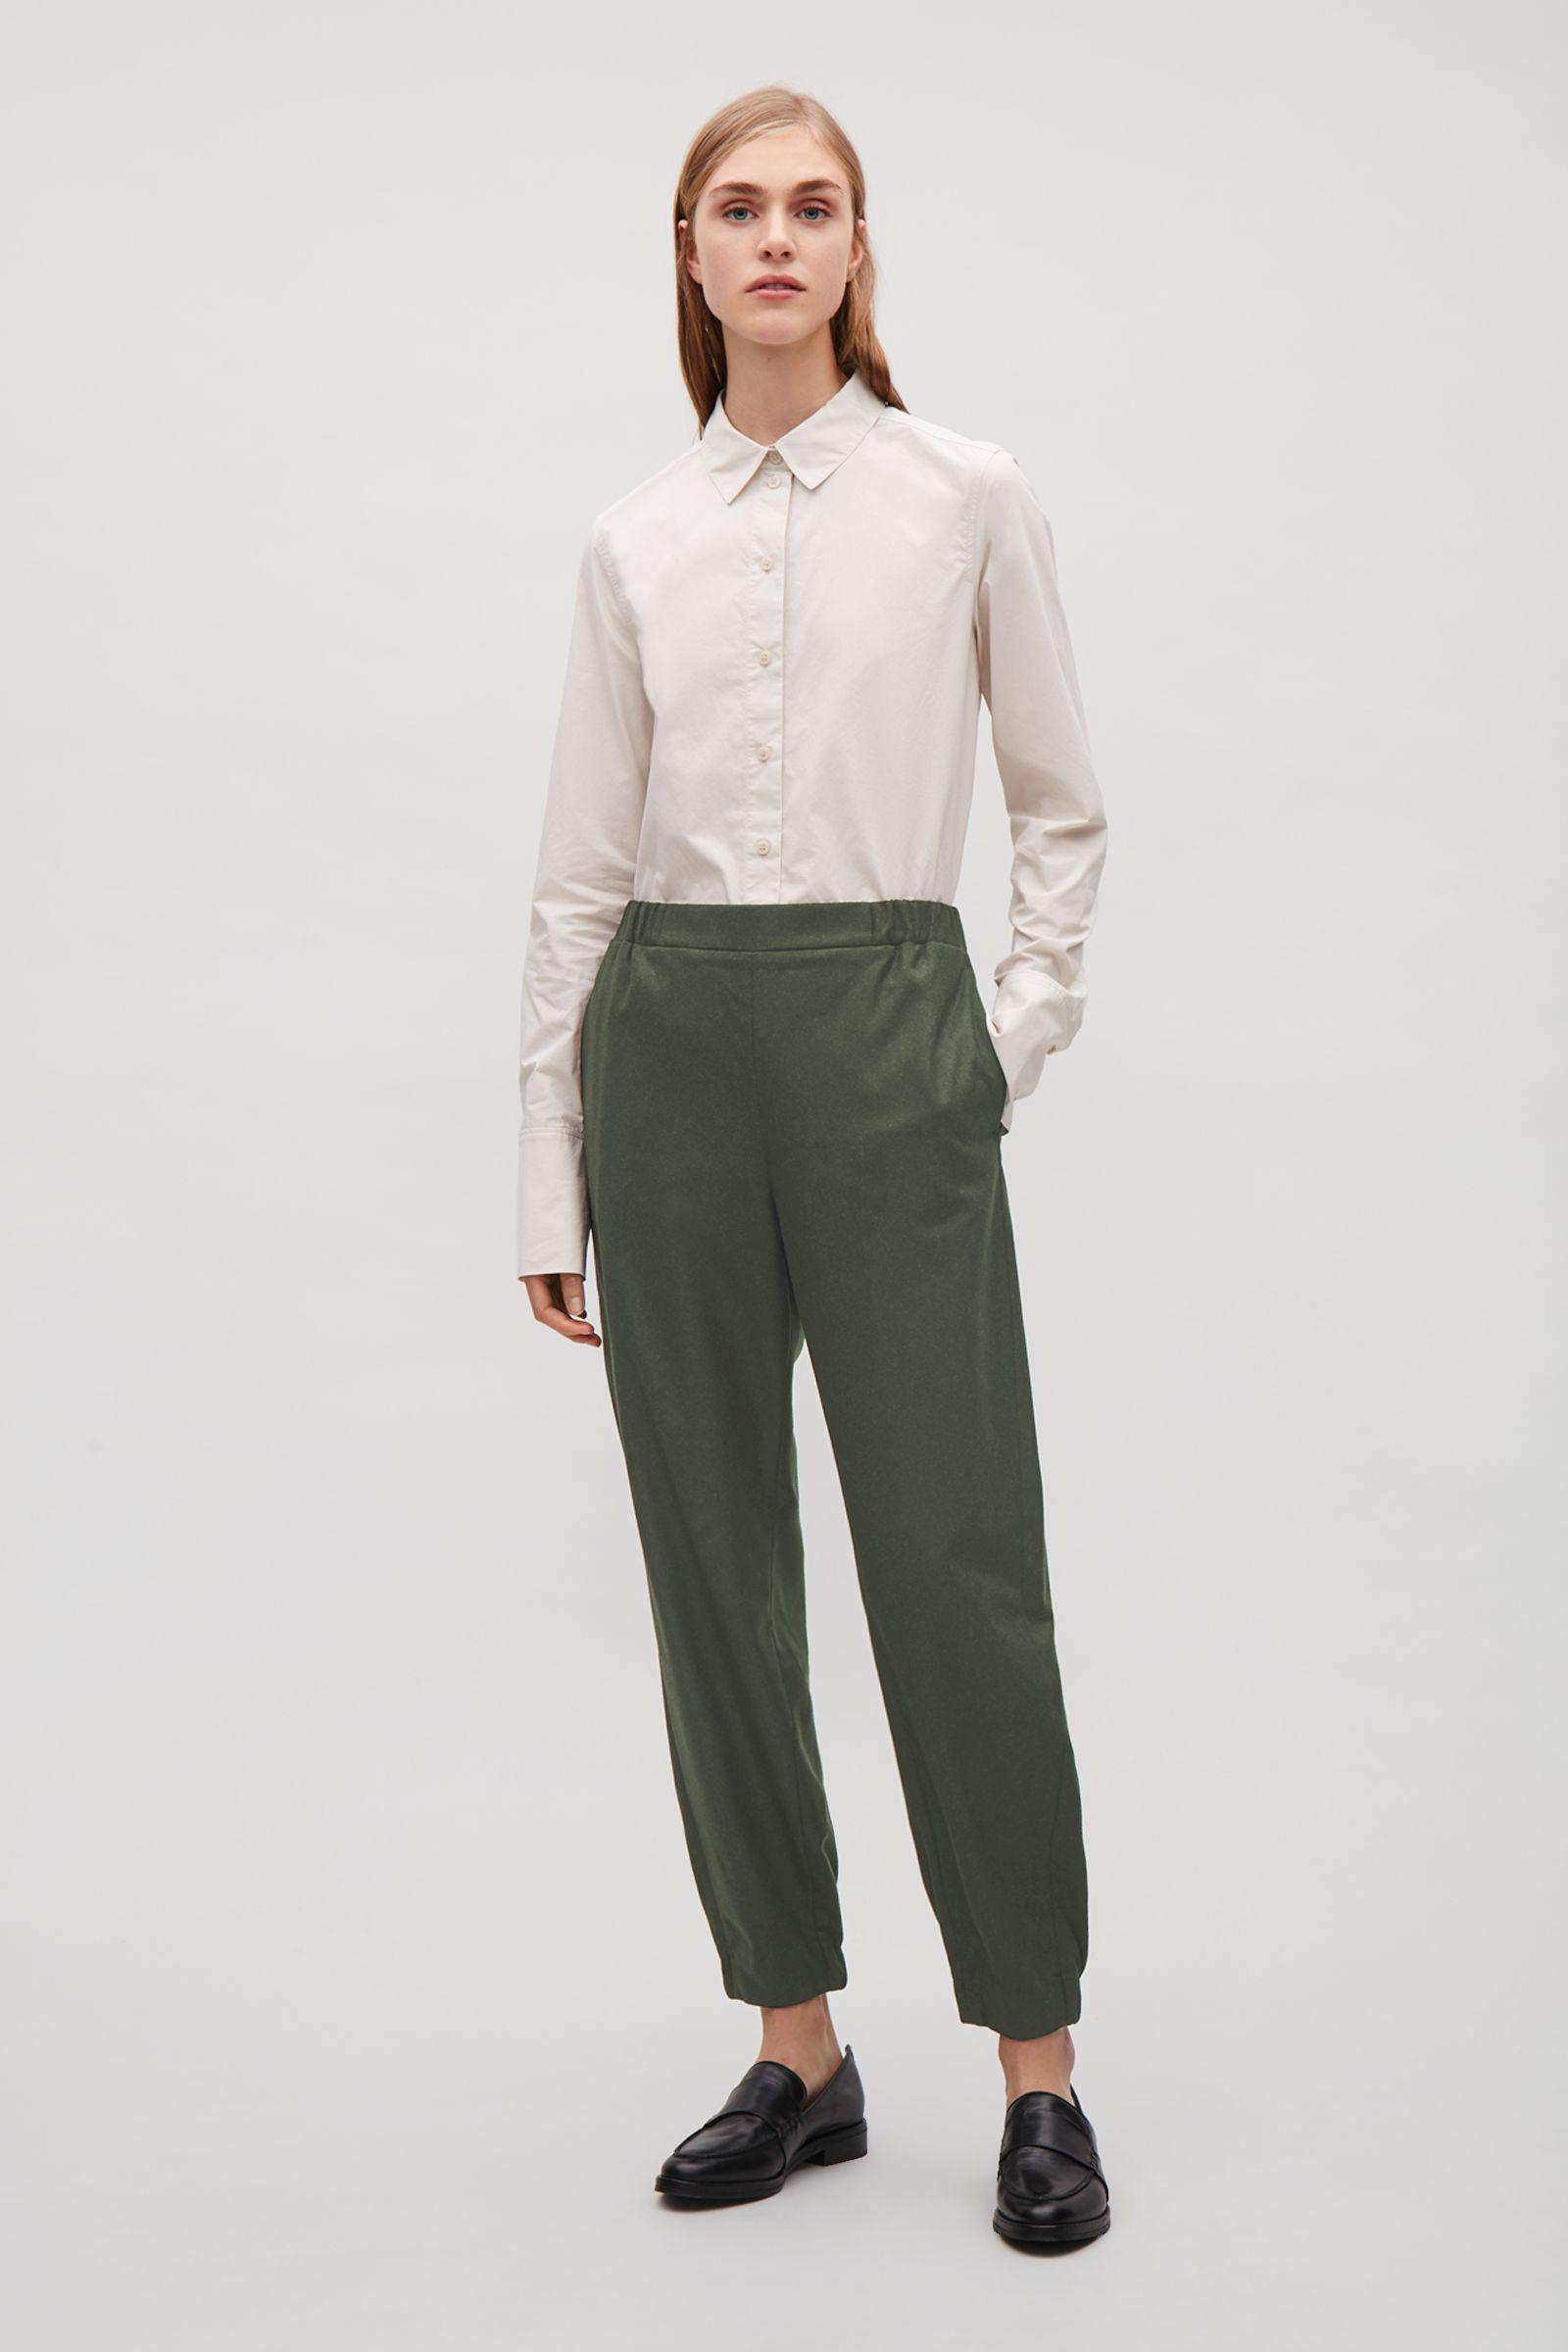 COS Wool Trousers With Elastic Detail in Khaki Green (Green) - Lyst